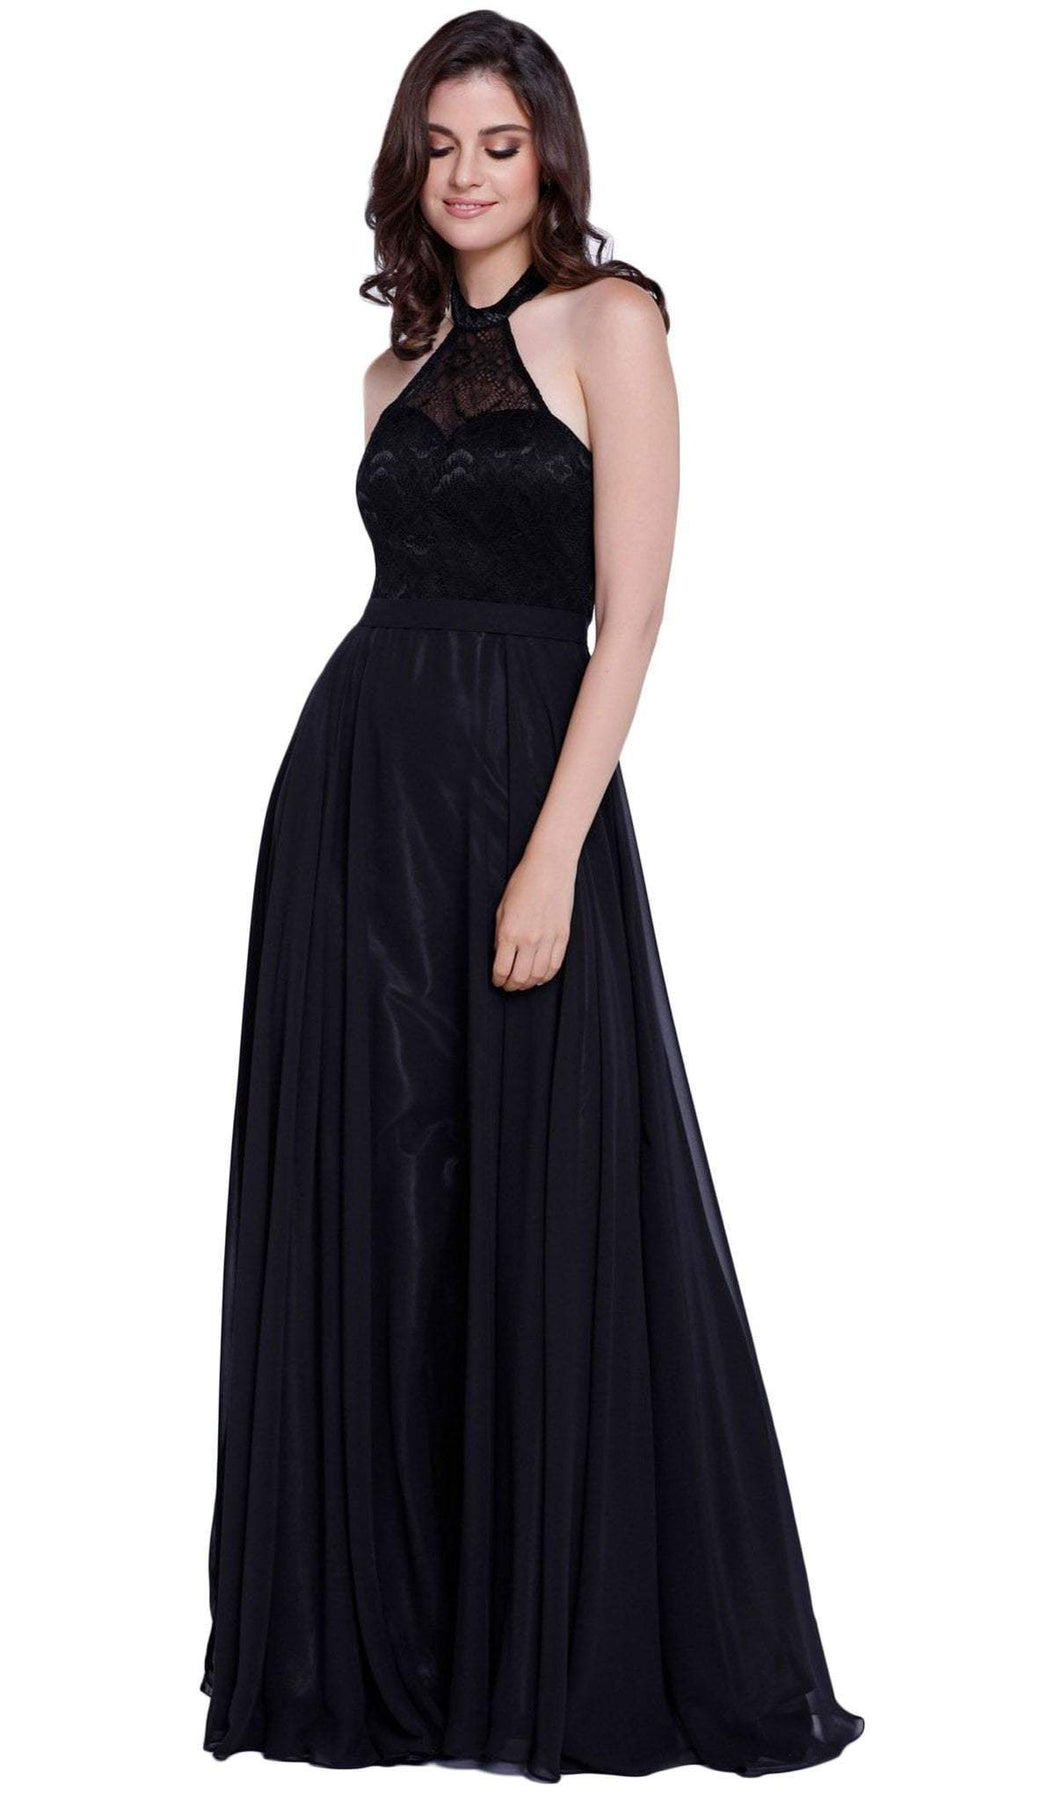 Nox Anabel - 8233 Halter Illusion Laced Bodice Long Evening Gown Special Occasion Dress XS / Black